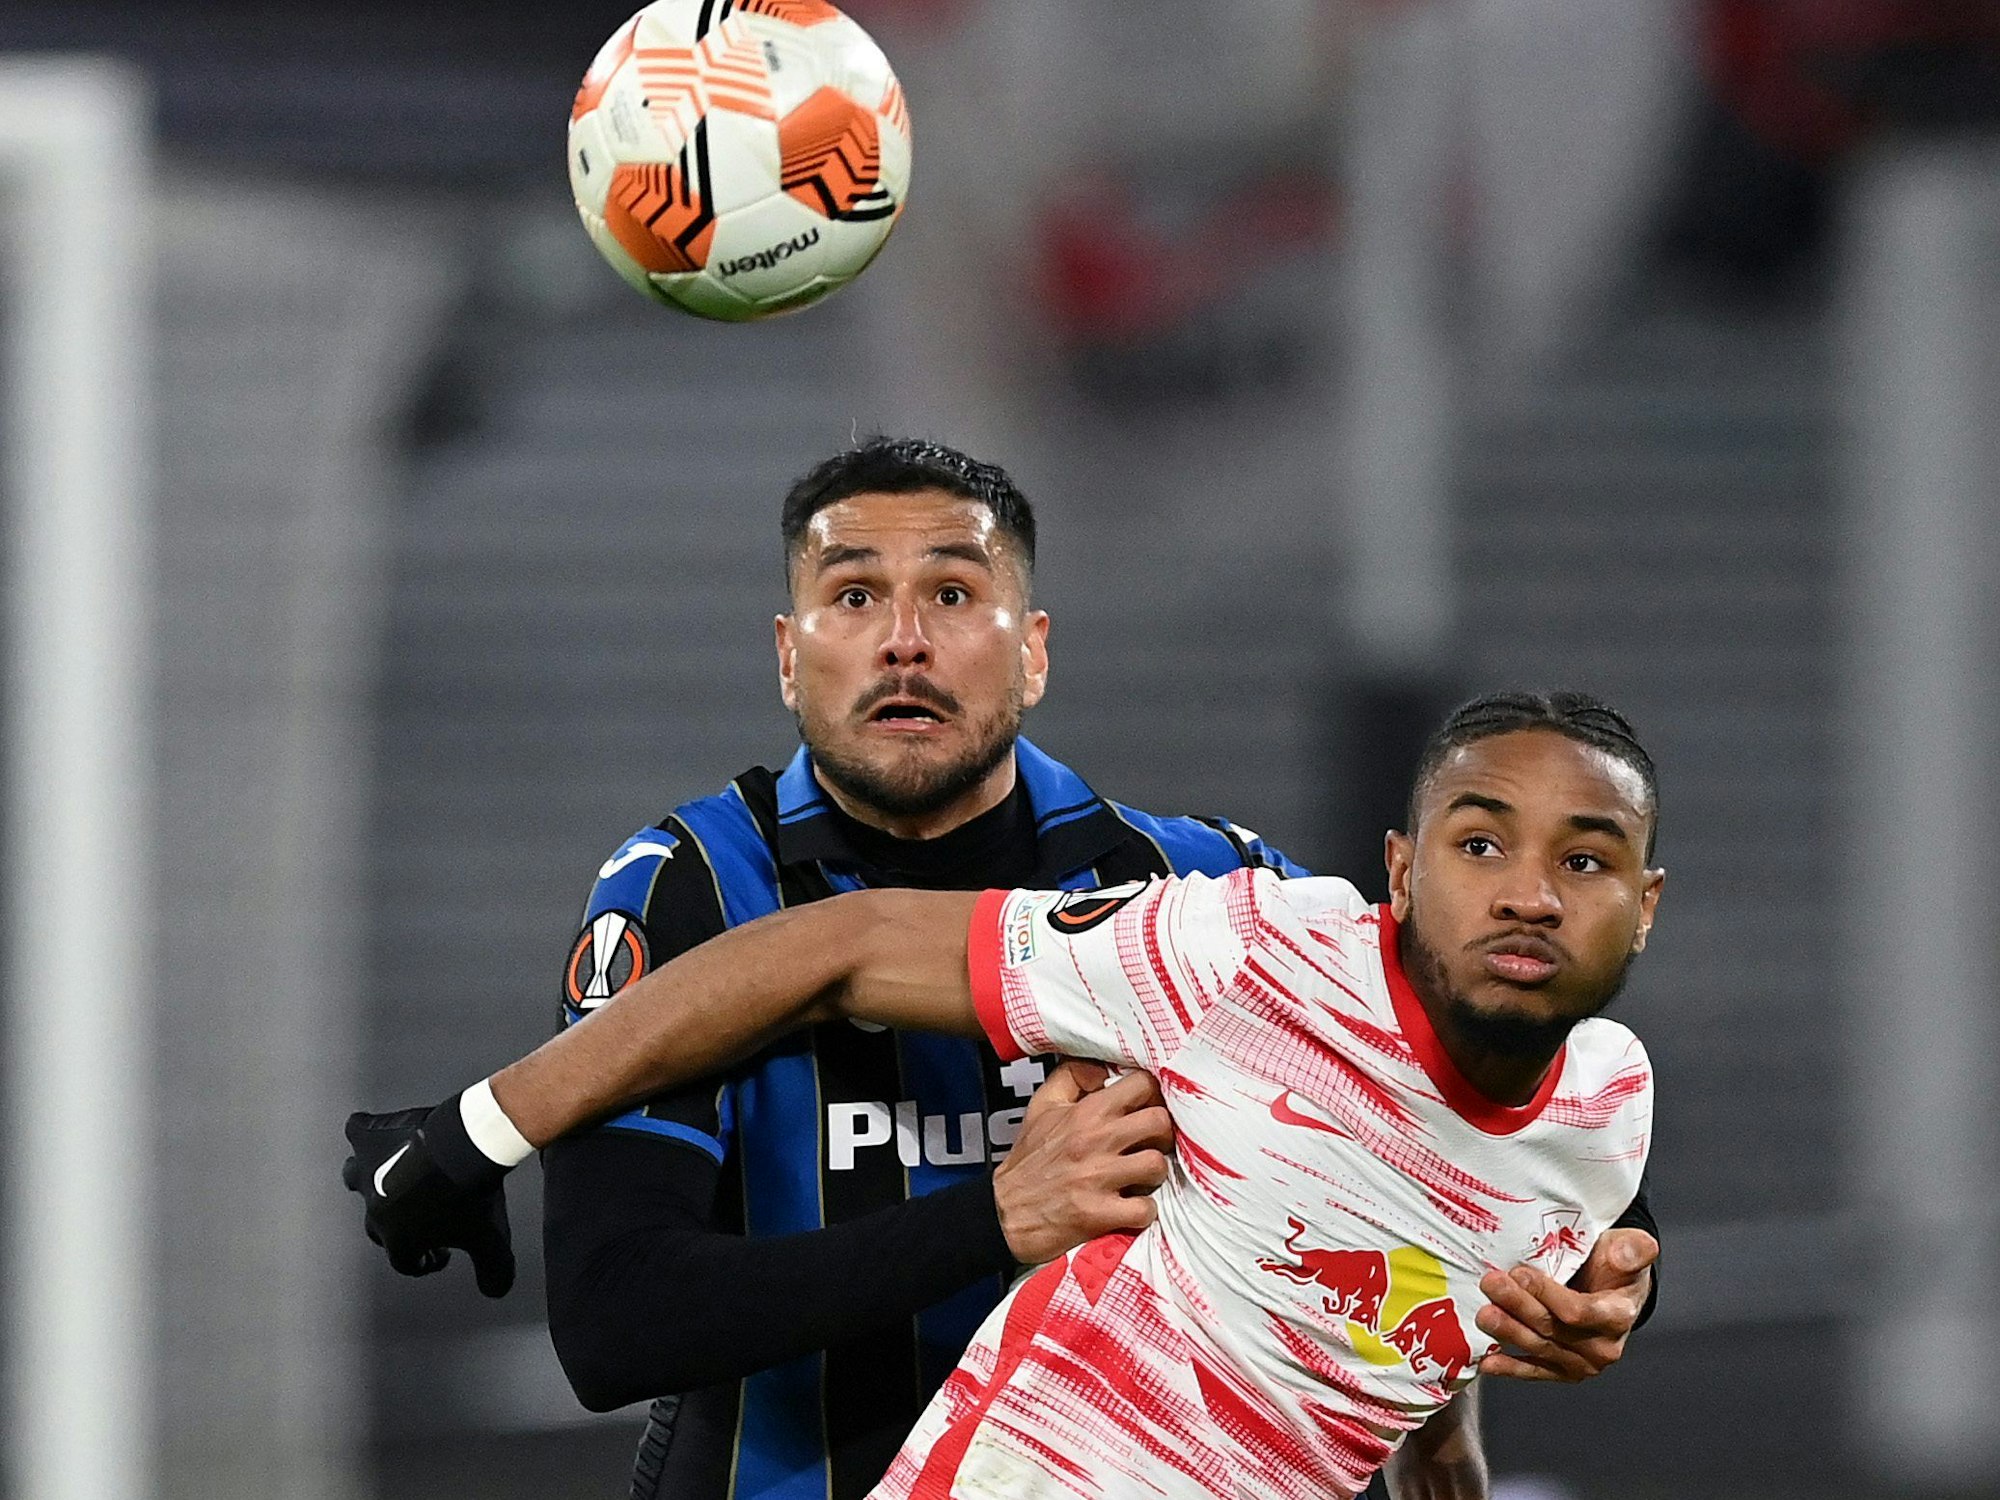 LEIPZIG, GERMANY - APRIL 07: Christopher Nkunku of RB Leipzig is challenged by Jose Luis Palomino of Atalanta B.C. during the UEFA Europa League Quarter Final Leg One match between RB Leipzig and Atalanta at Football Arena Leipzig on April 07, 2022 in Leipzig, Germany. (Photo by Stuart Franklin/Getty Images)